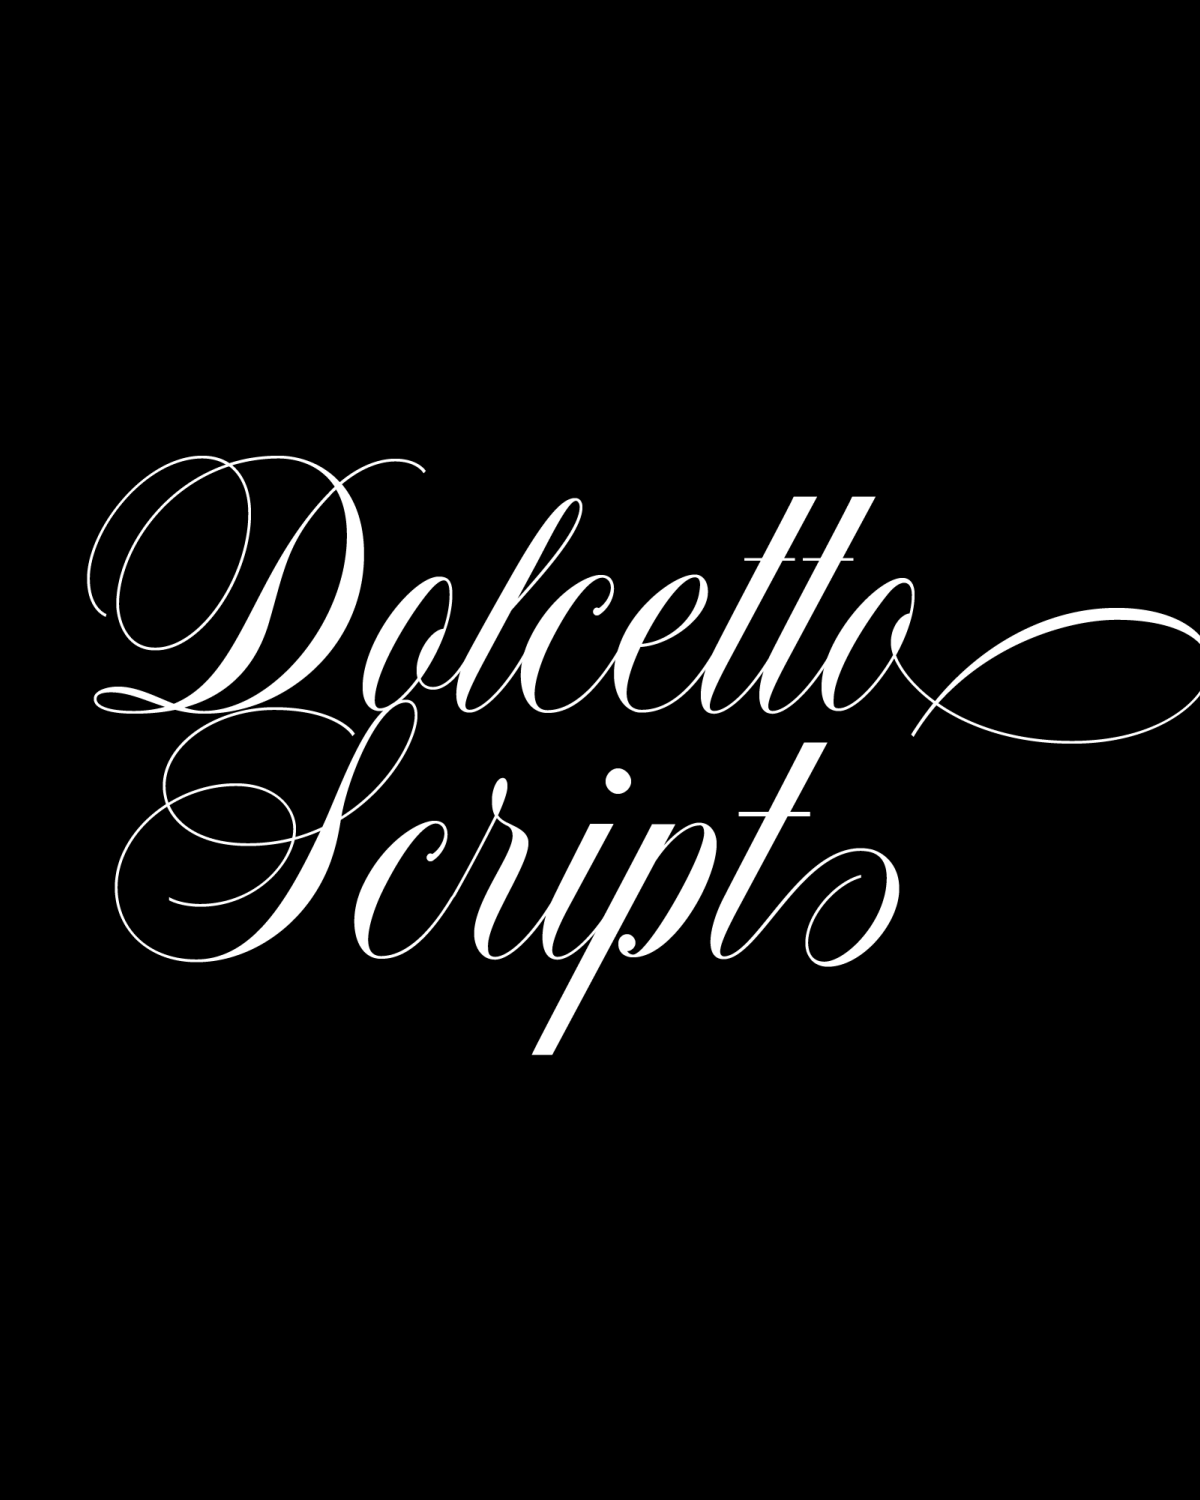 Dolcetto Font Family16设计网精选英文字体